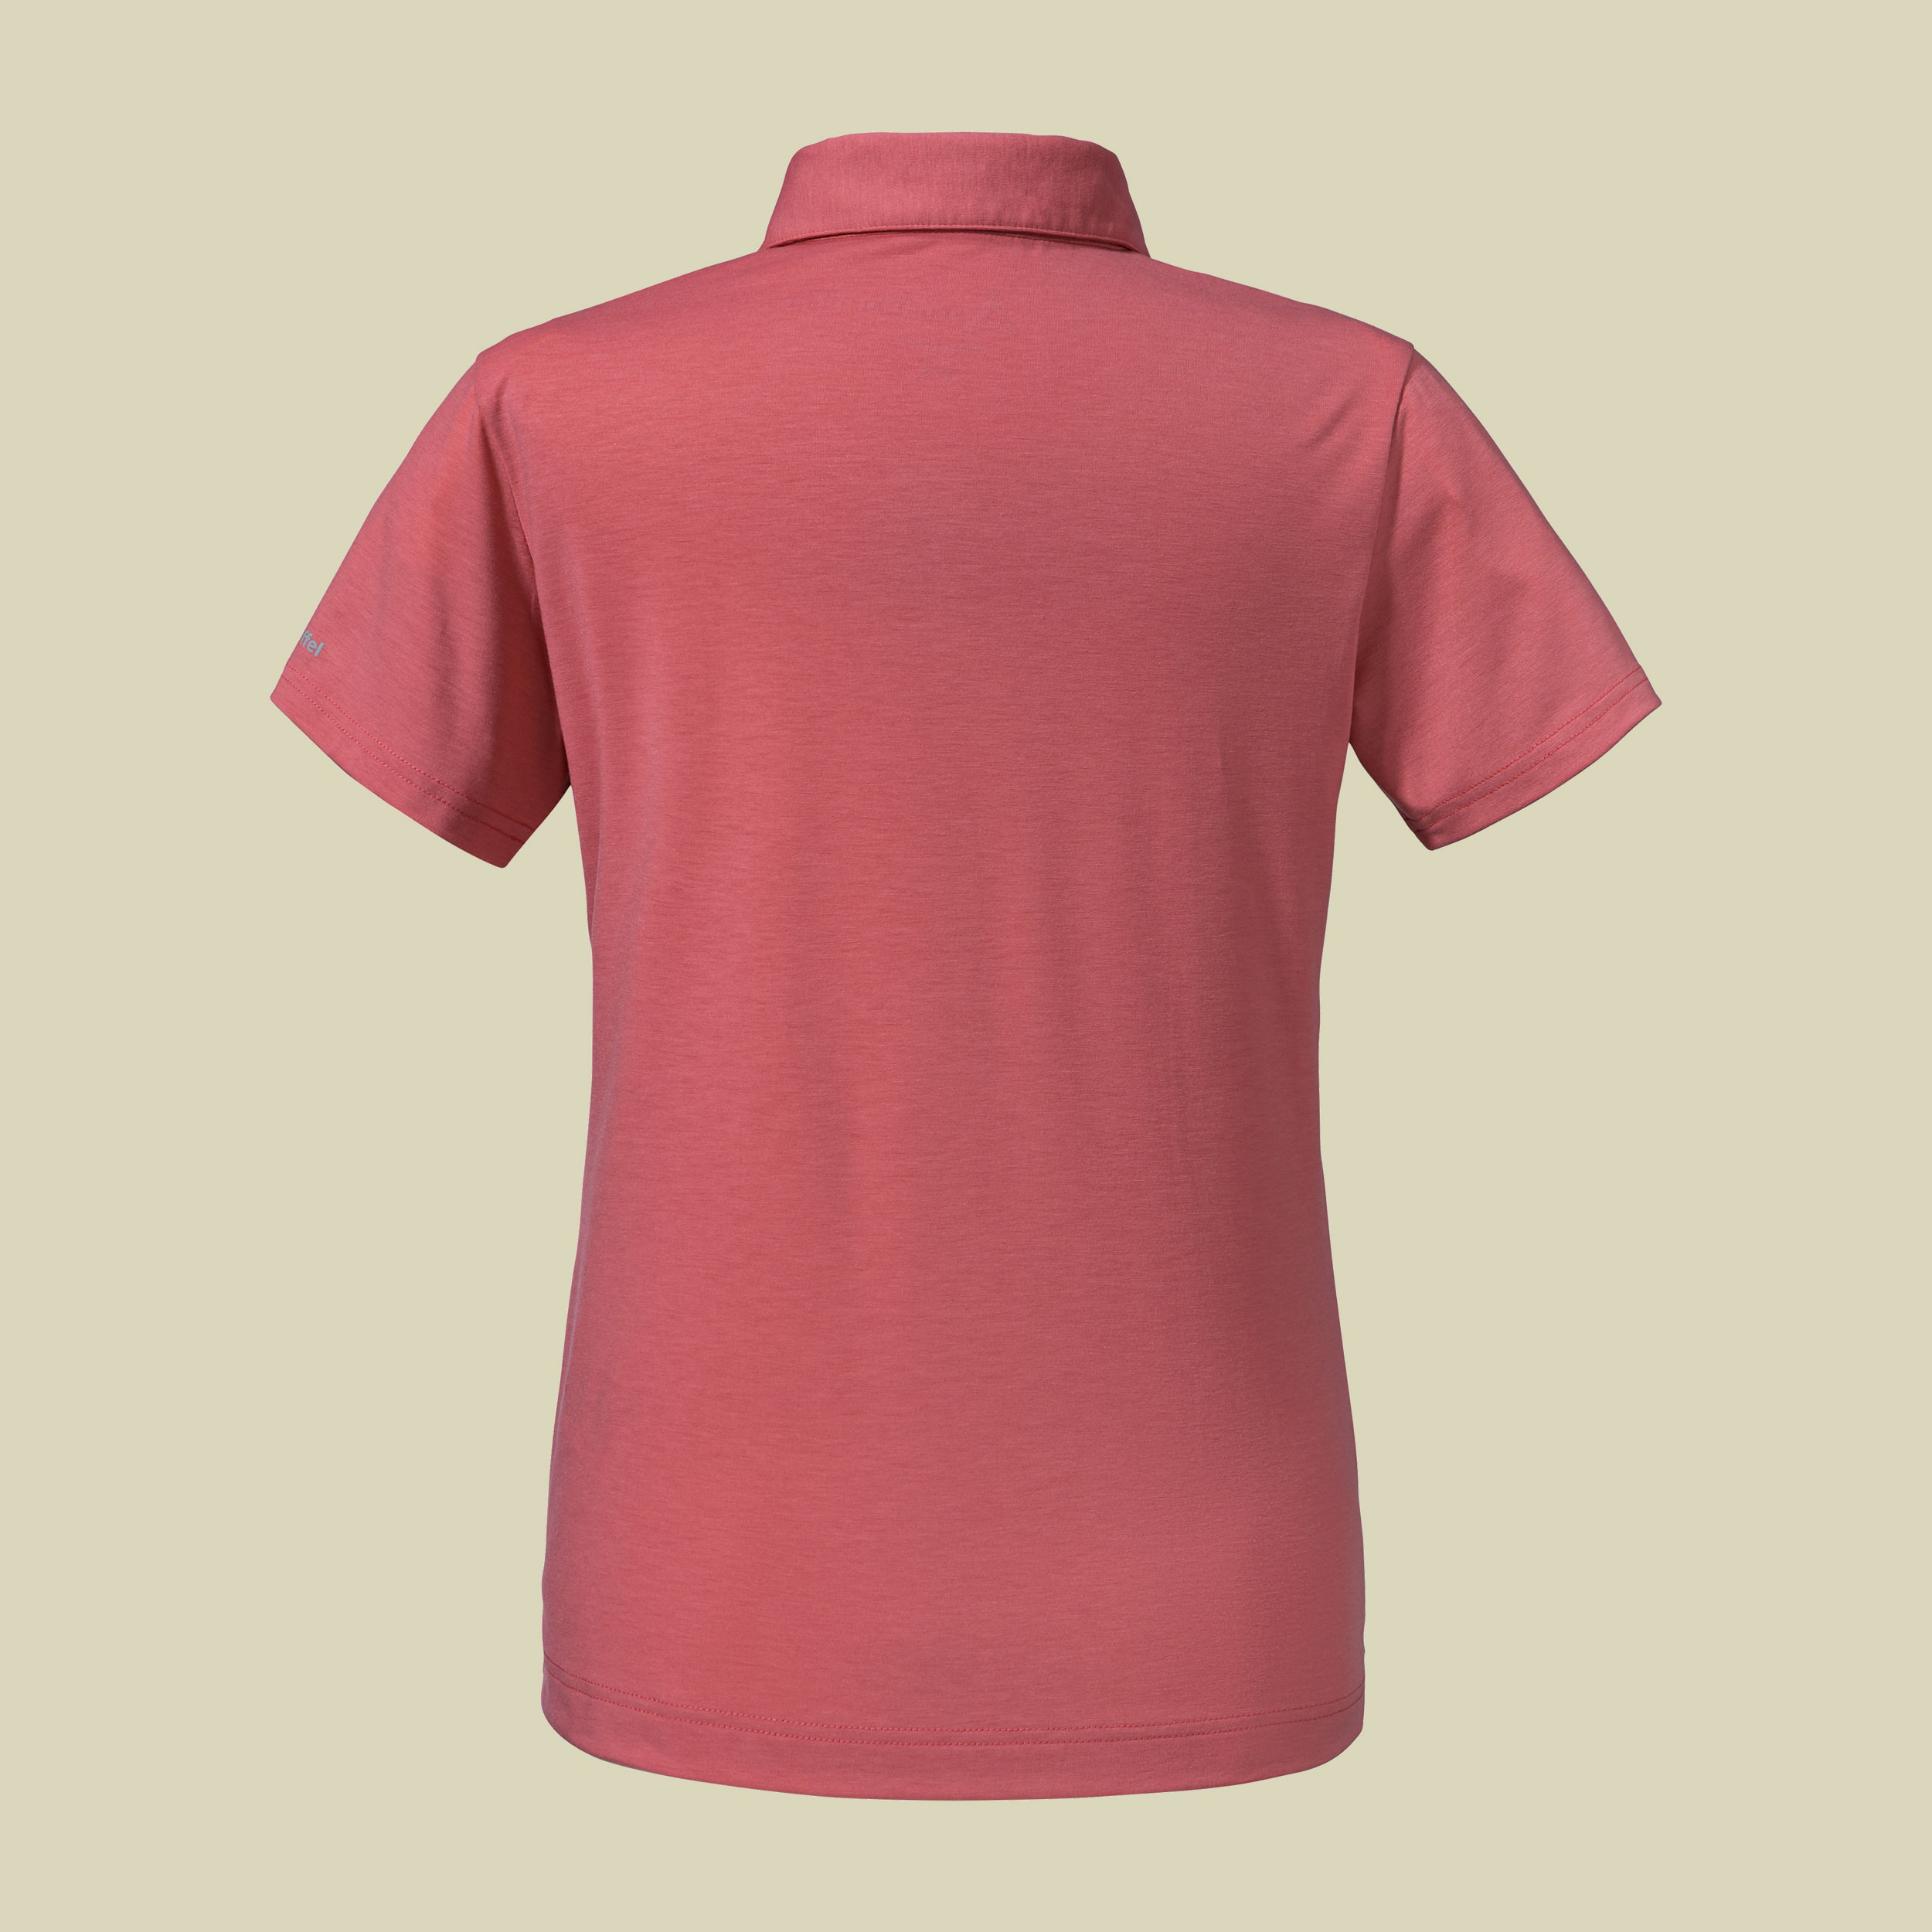 Polo Shirt Ramseck L Women 40 rot - clasping rose